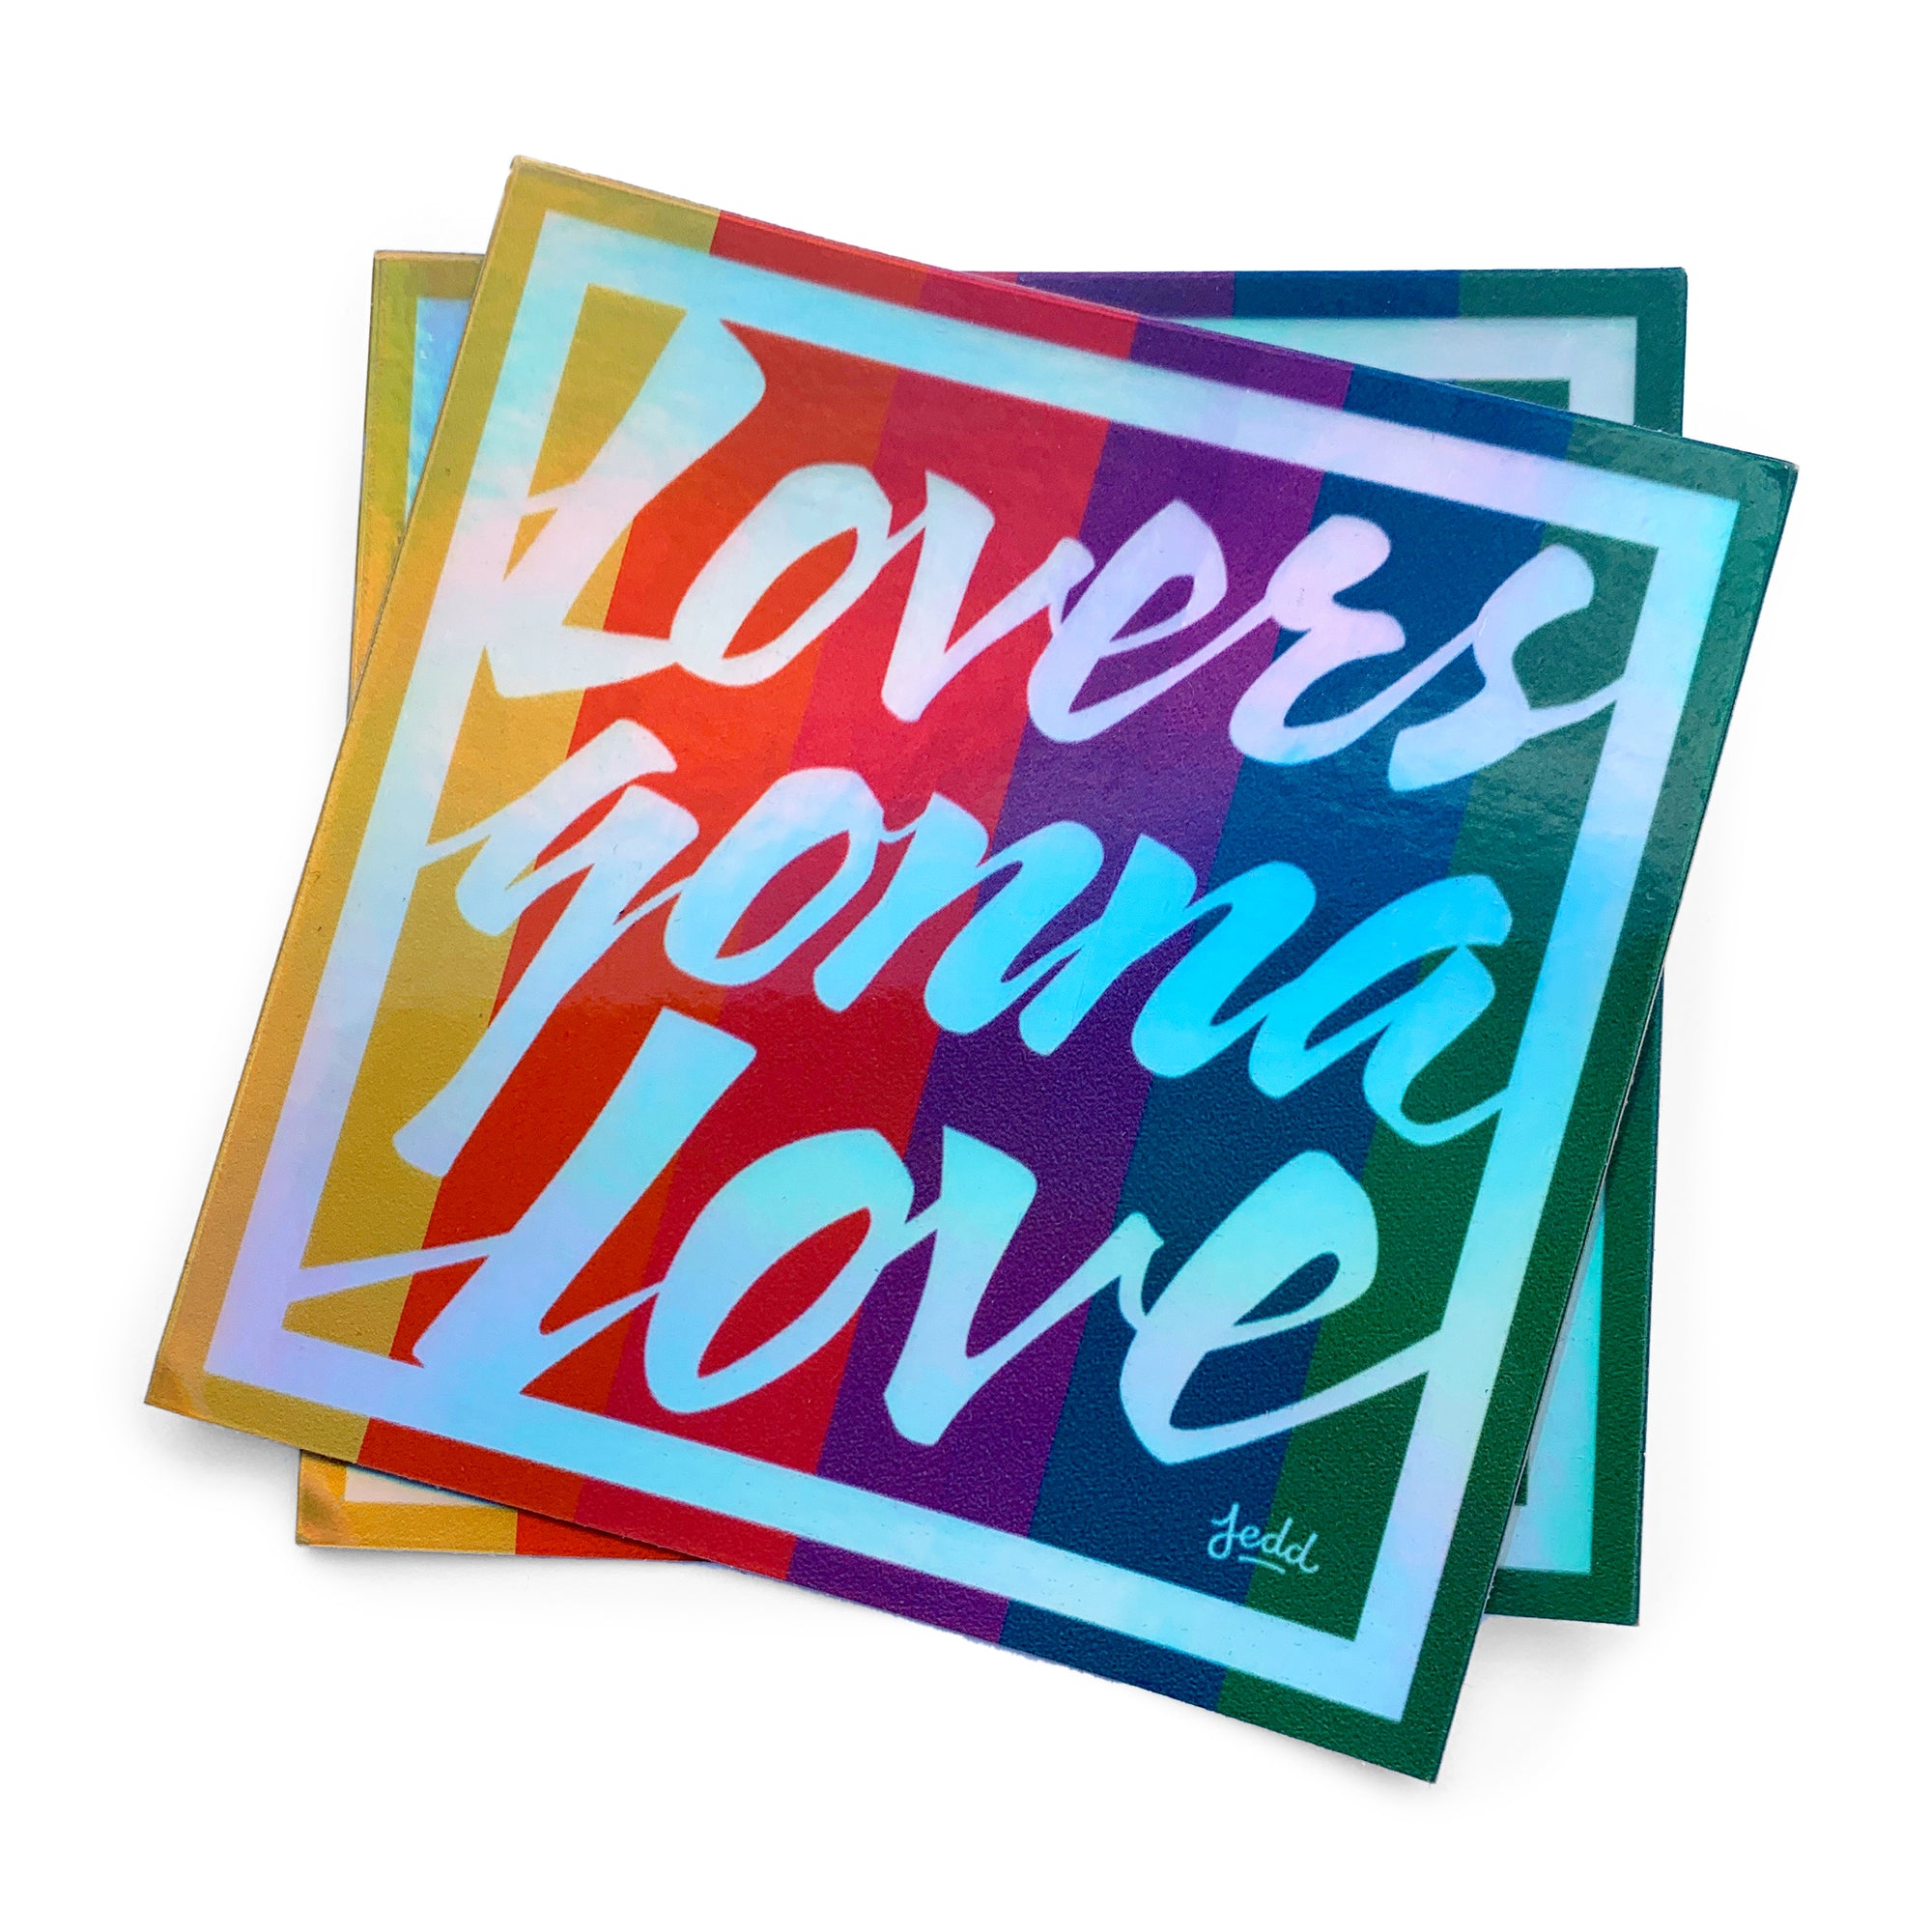 Two holographic stickers with a design that says Lovers Gonna Love